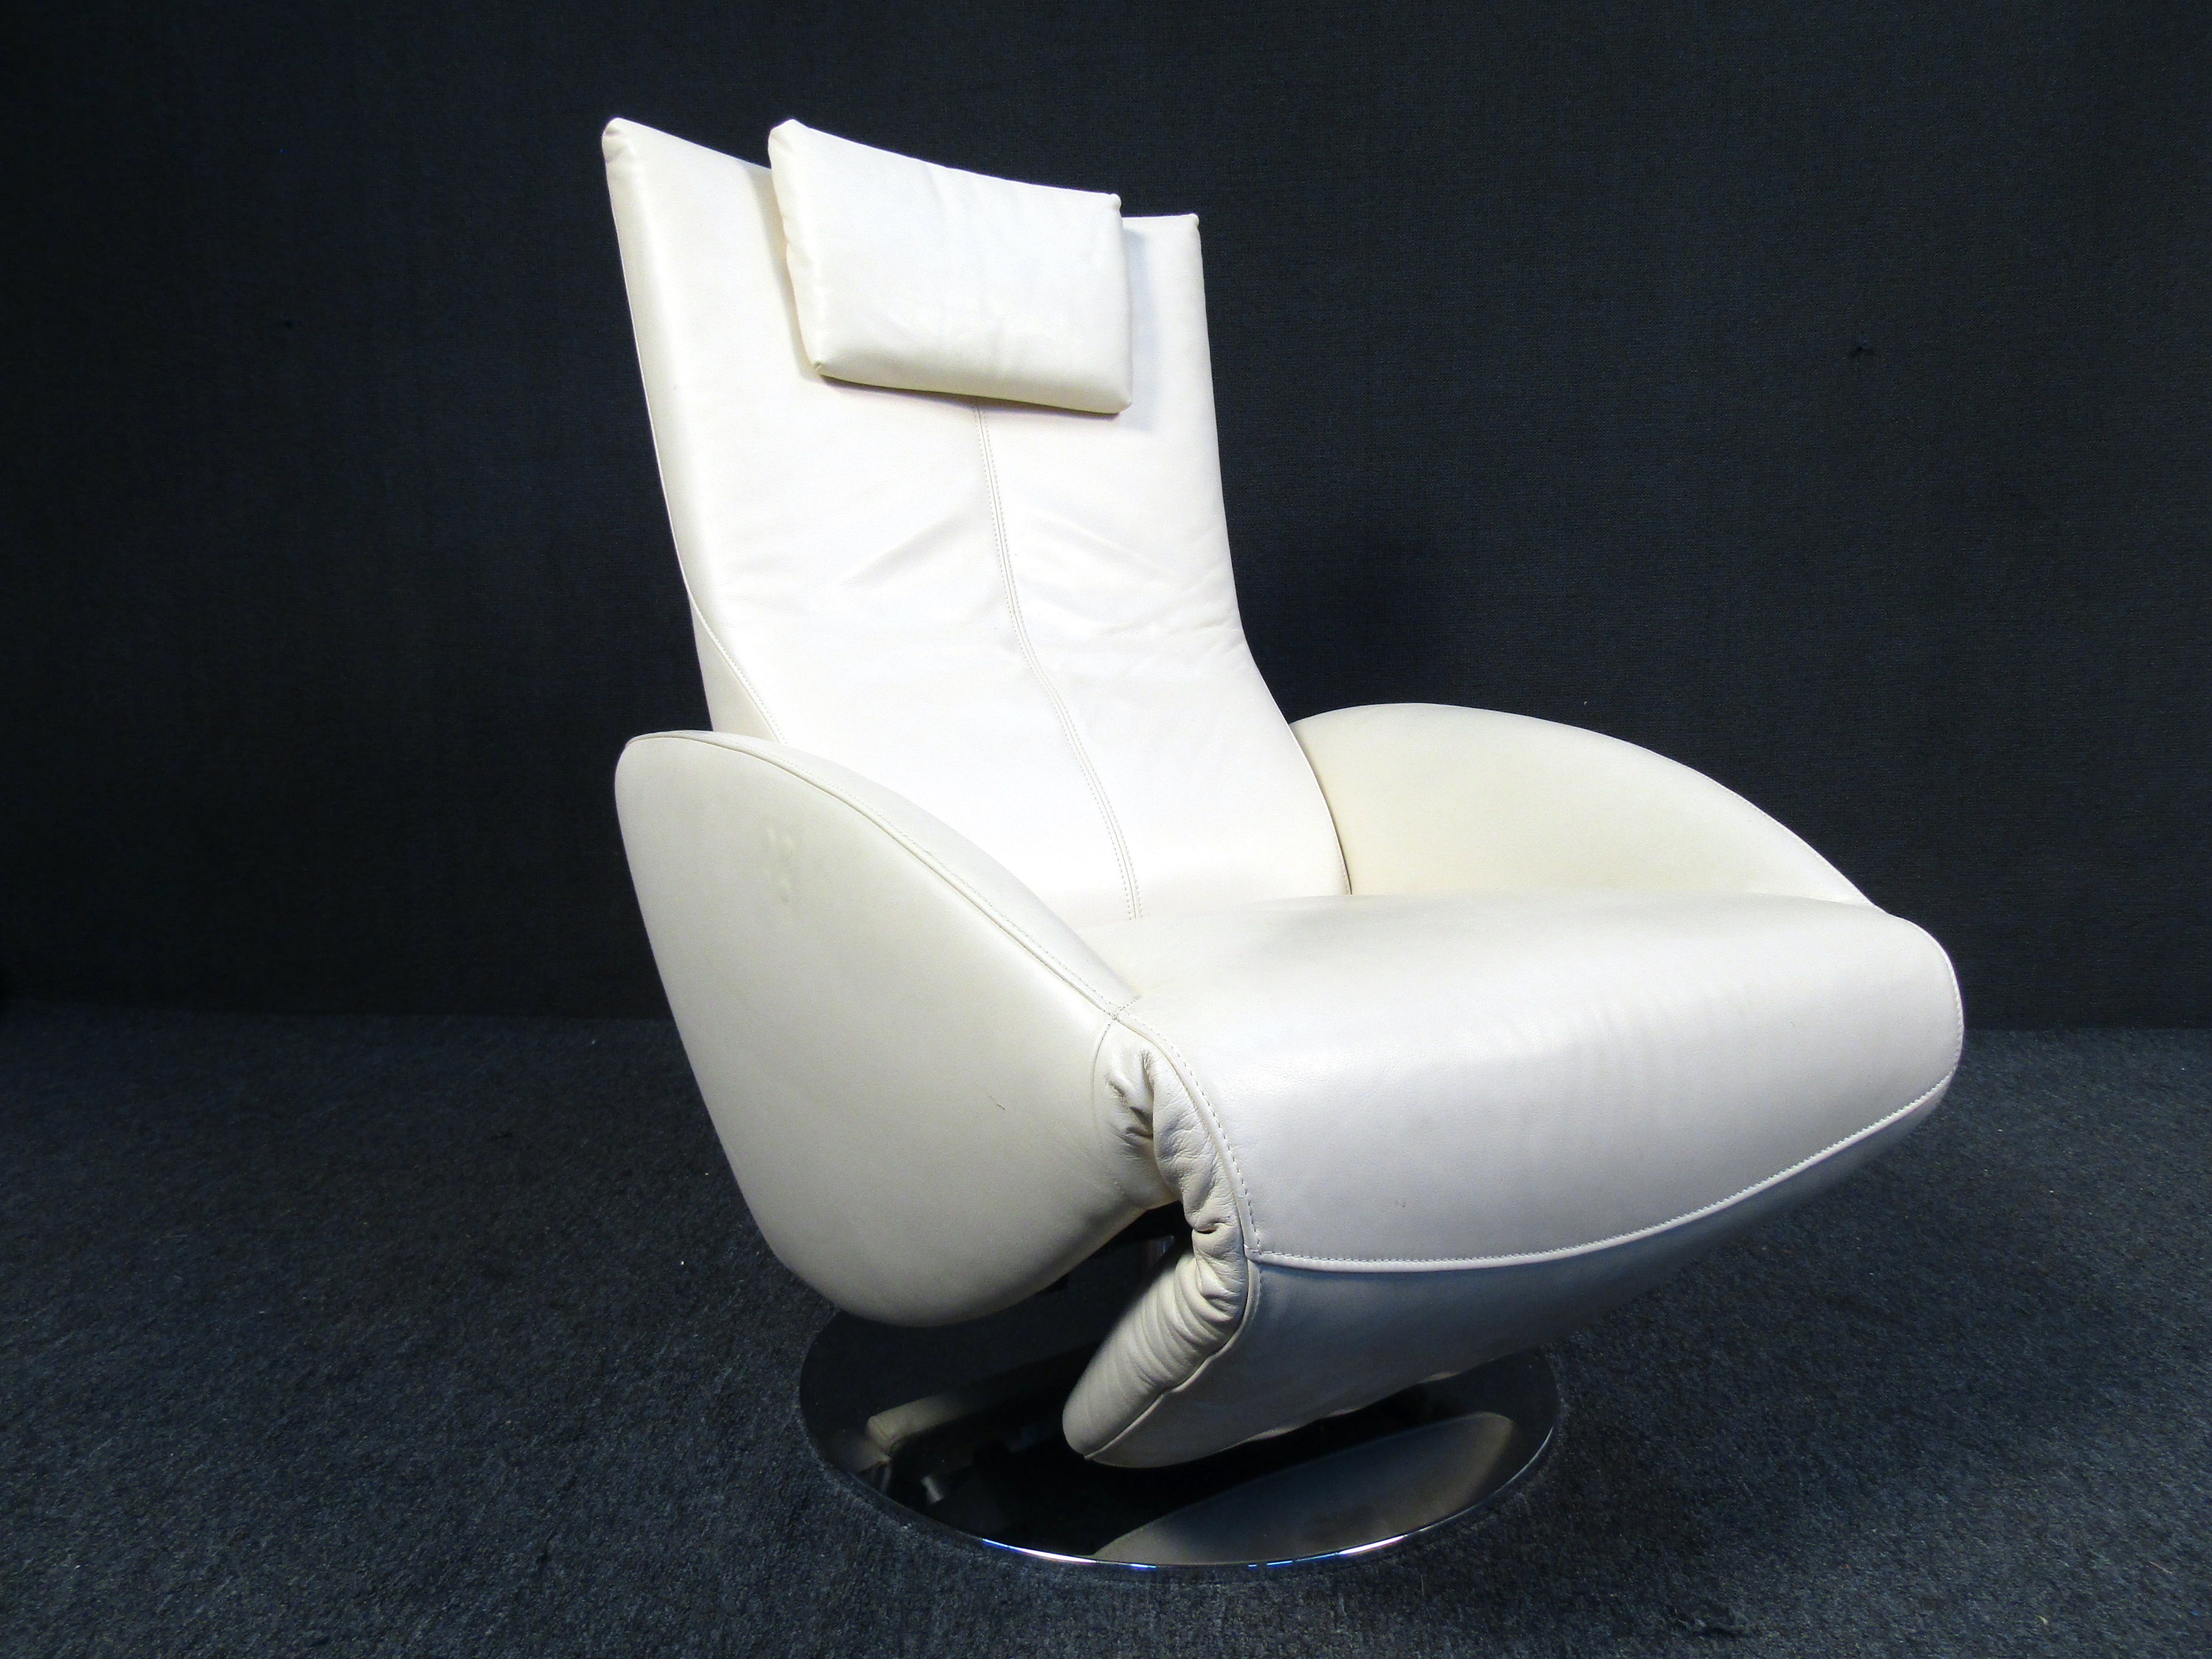 Stylish leather multi function chair by Swiss company FSM. This chair features quality white leather upholstery, round stainless steel base, and electronic reclining functionality with button controls positioned on the arm. A handsome chair that